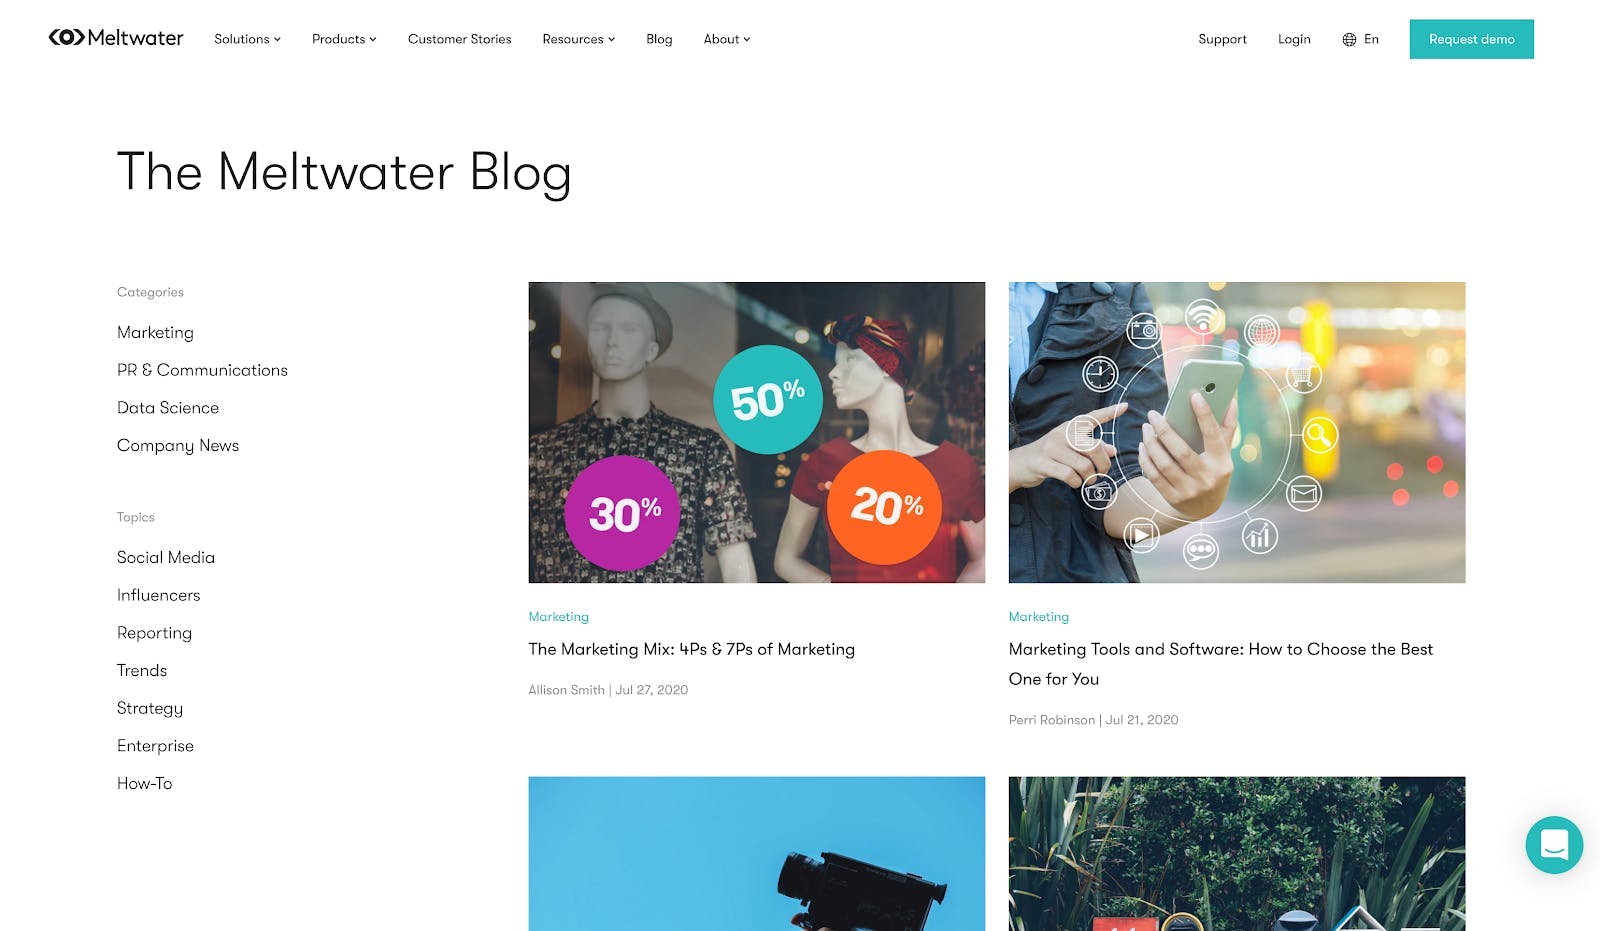 content marketing example of the Meltwater blog